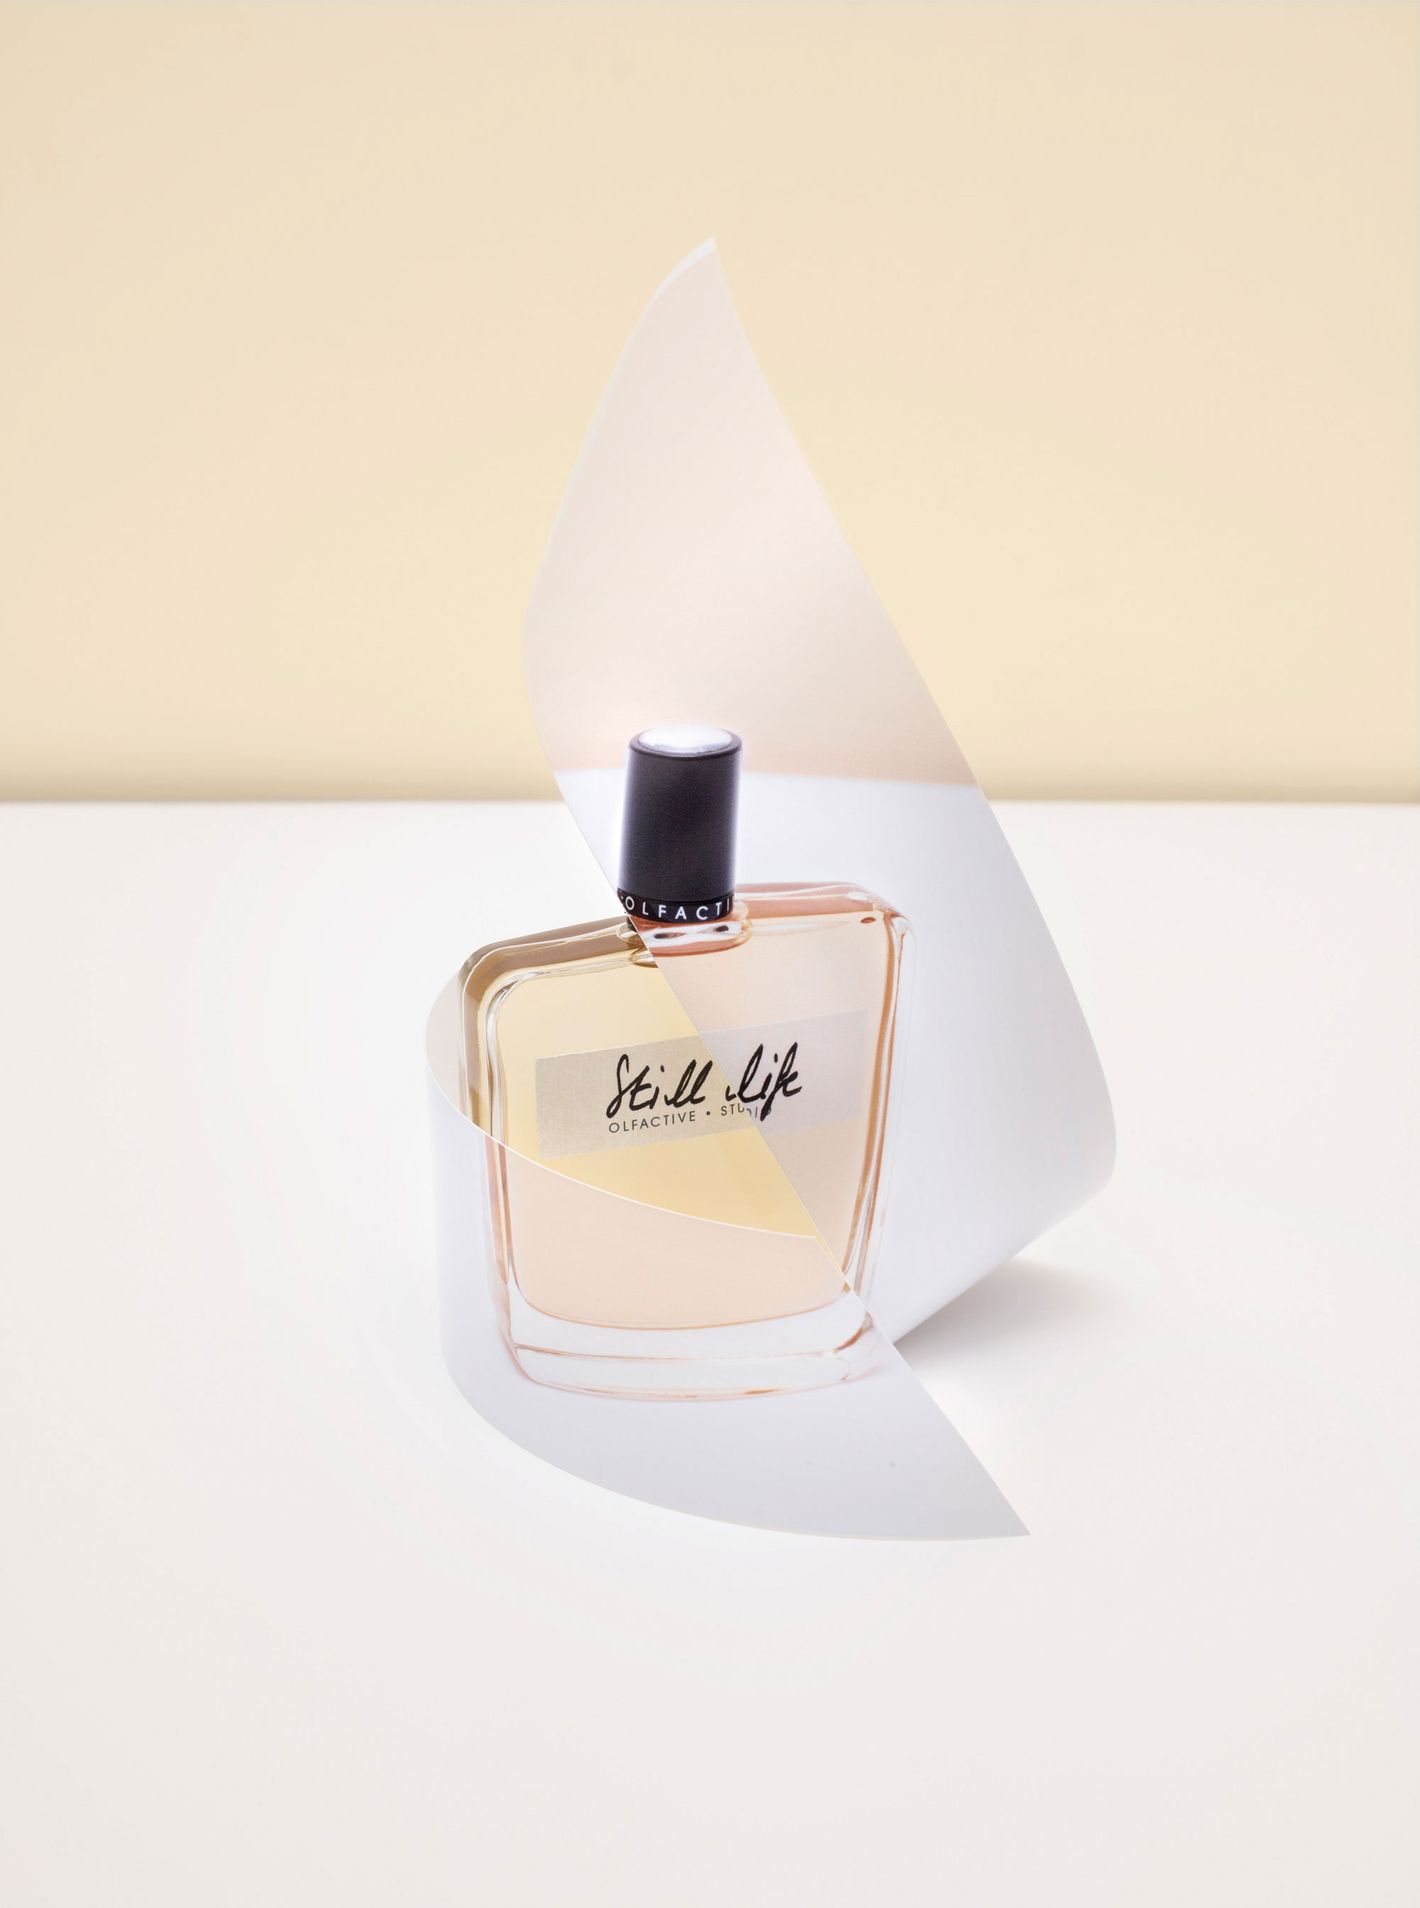 Luxury Perfumes, As Crowdsourced by Facebook